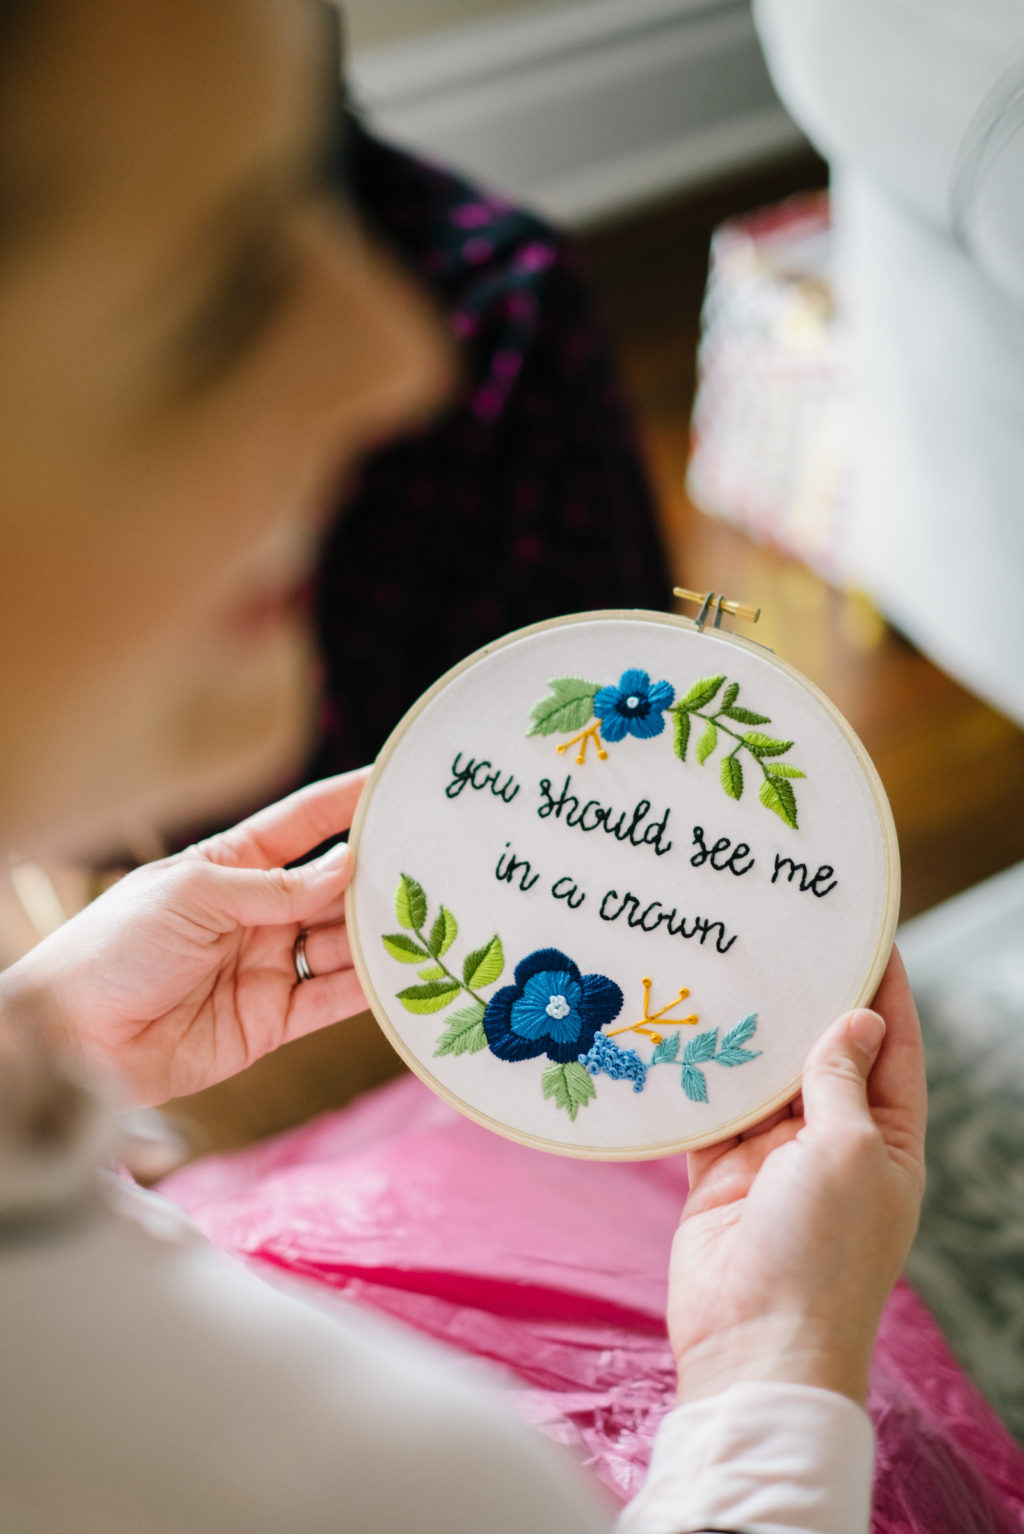 Bride Holding Personal Item, Embroidered Hoop "You Should See Me in a Crown" quote